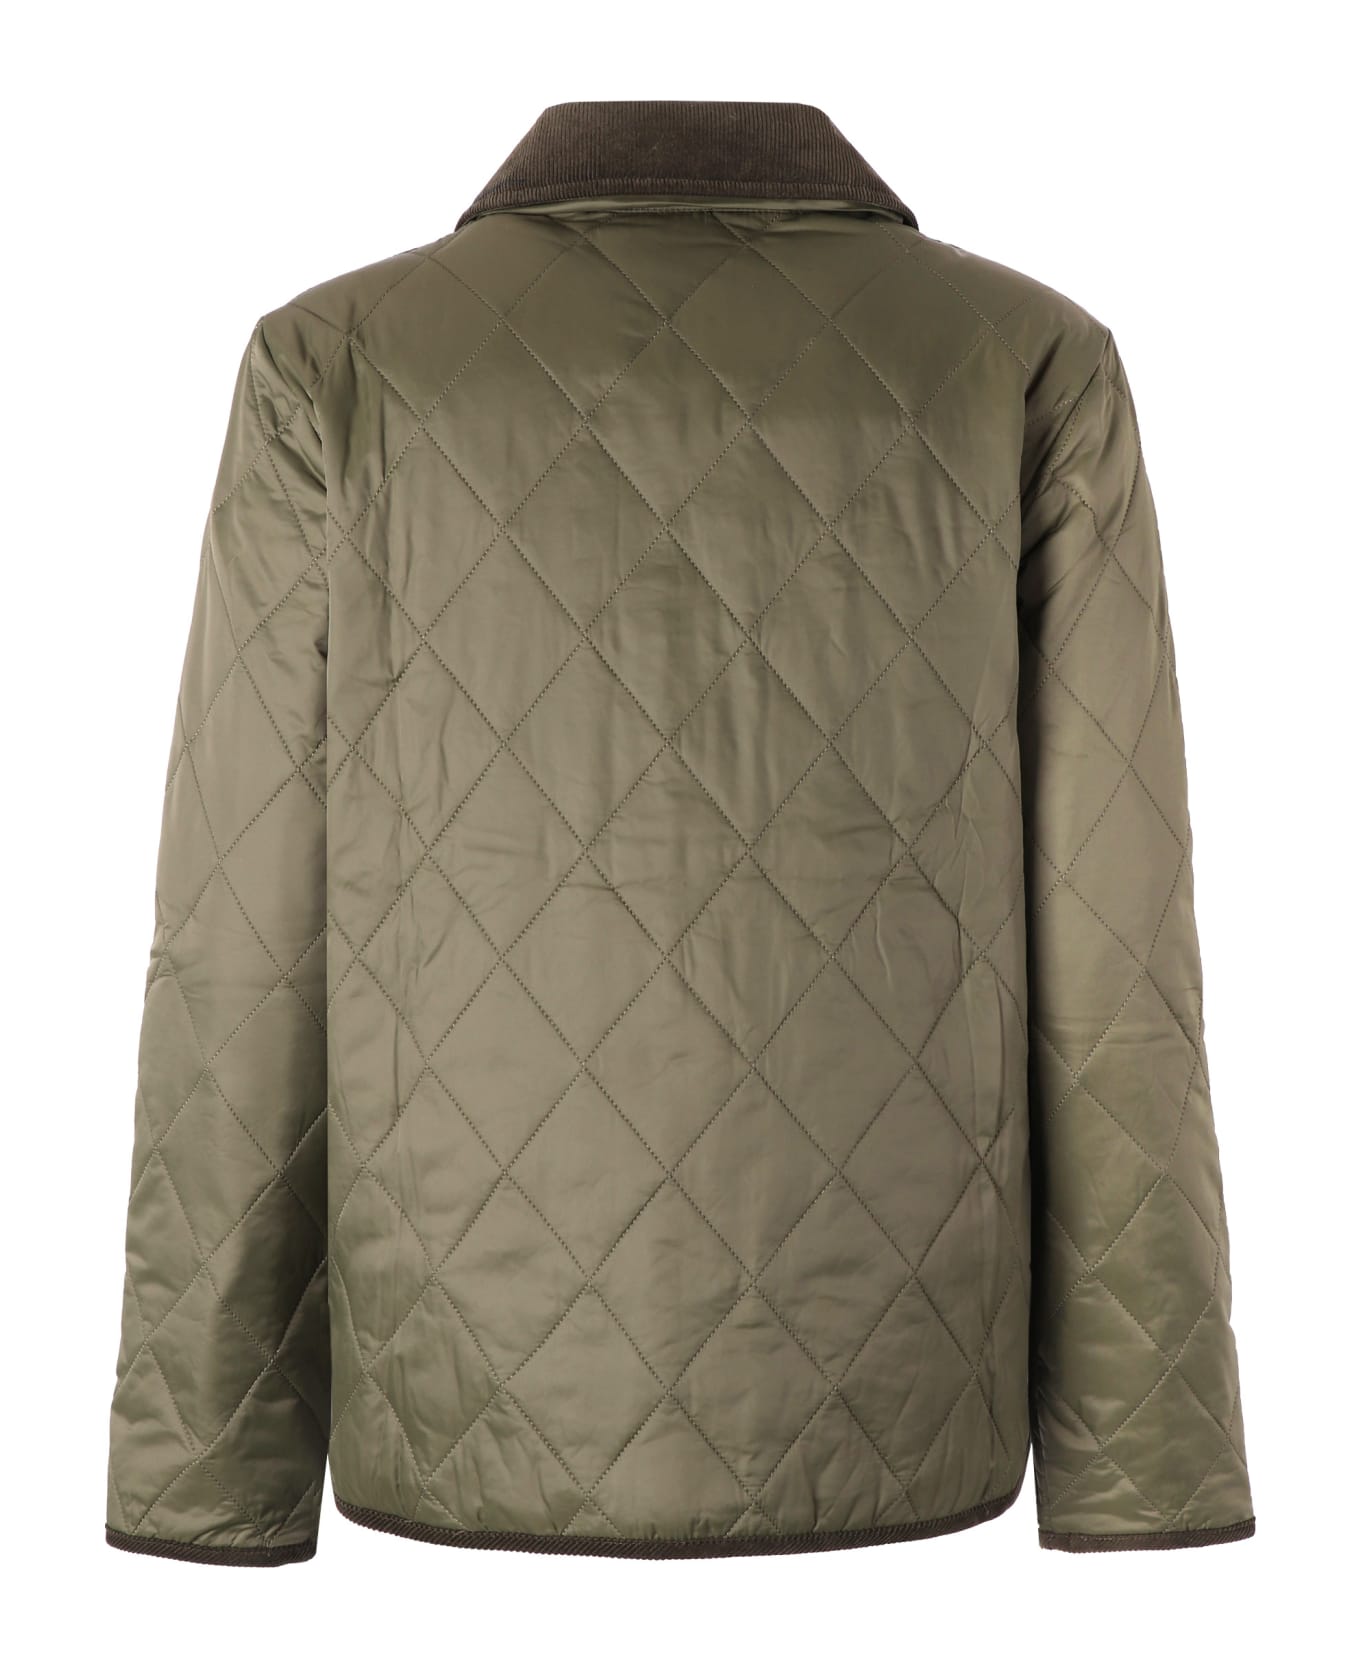 Barbour Clydebank Quilted Jacket | italist